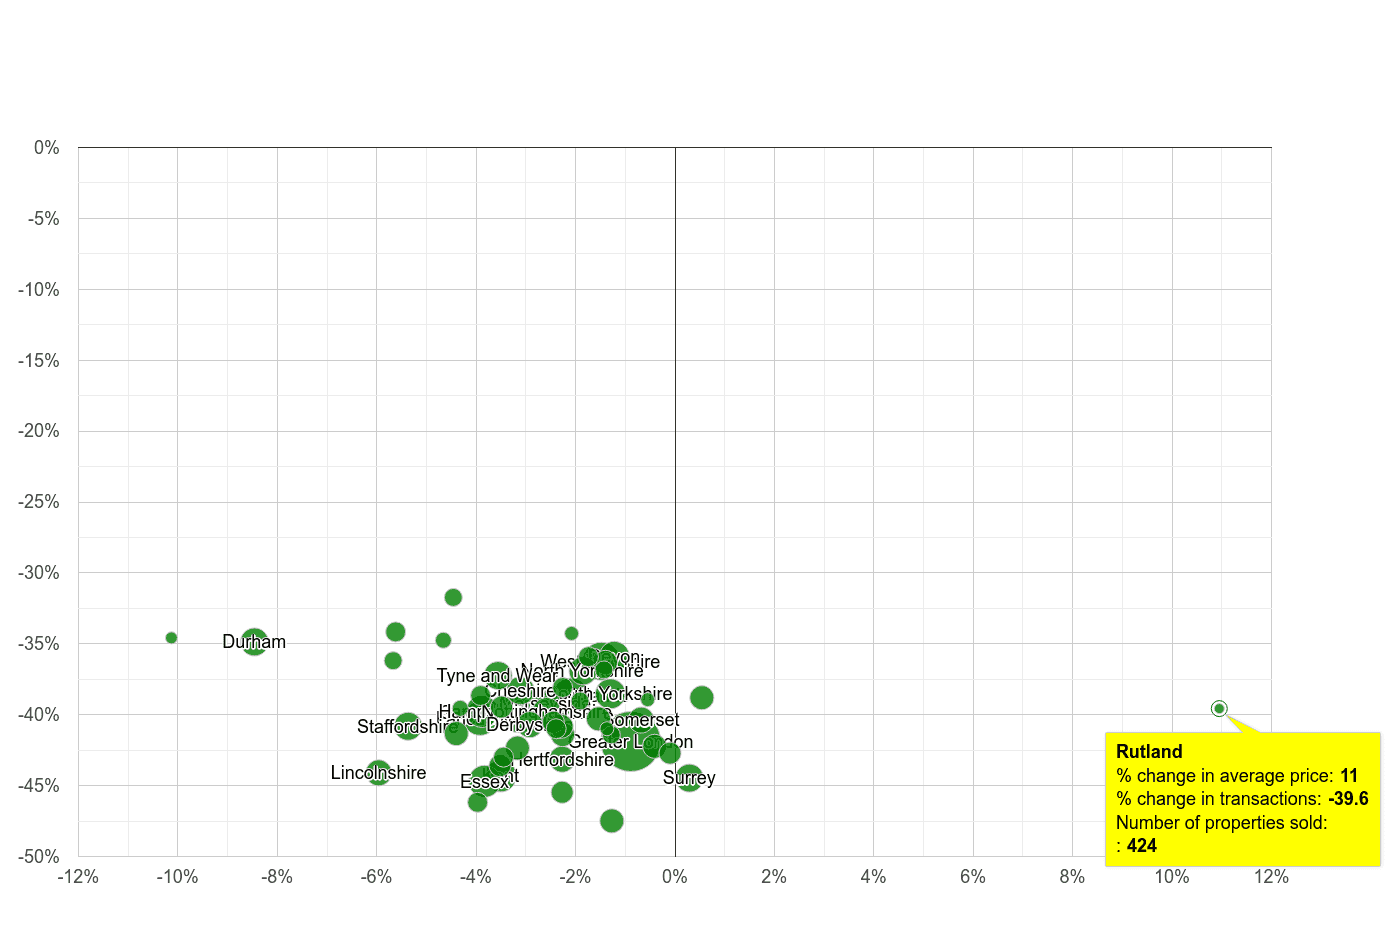 Rutland property price and sales volume change relative to other counties